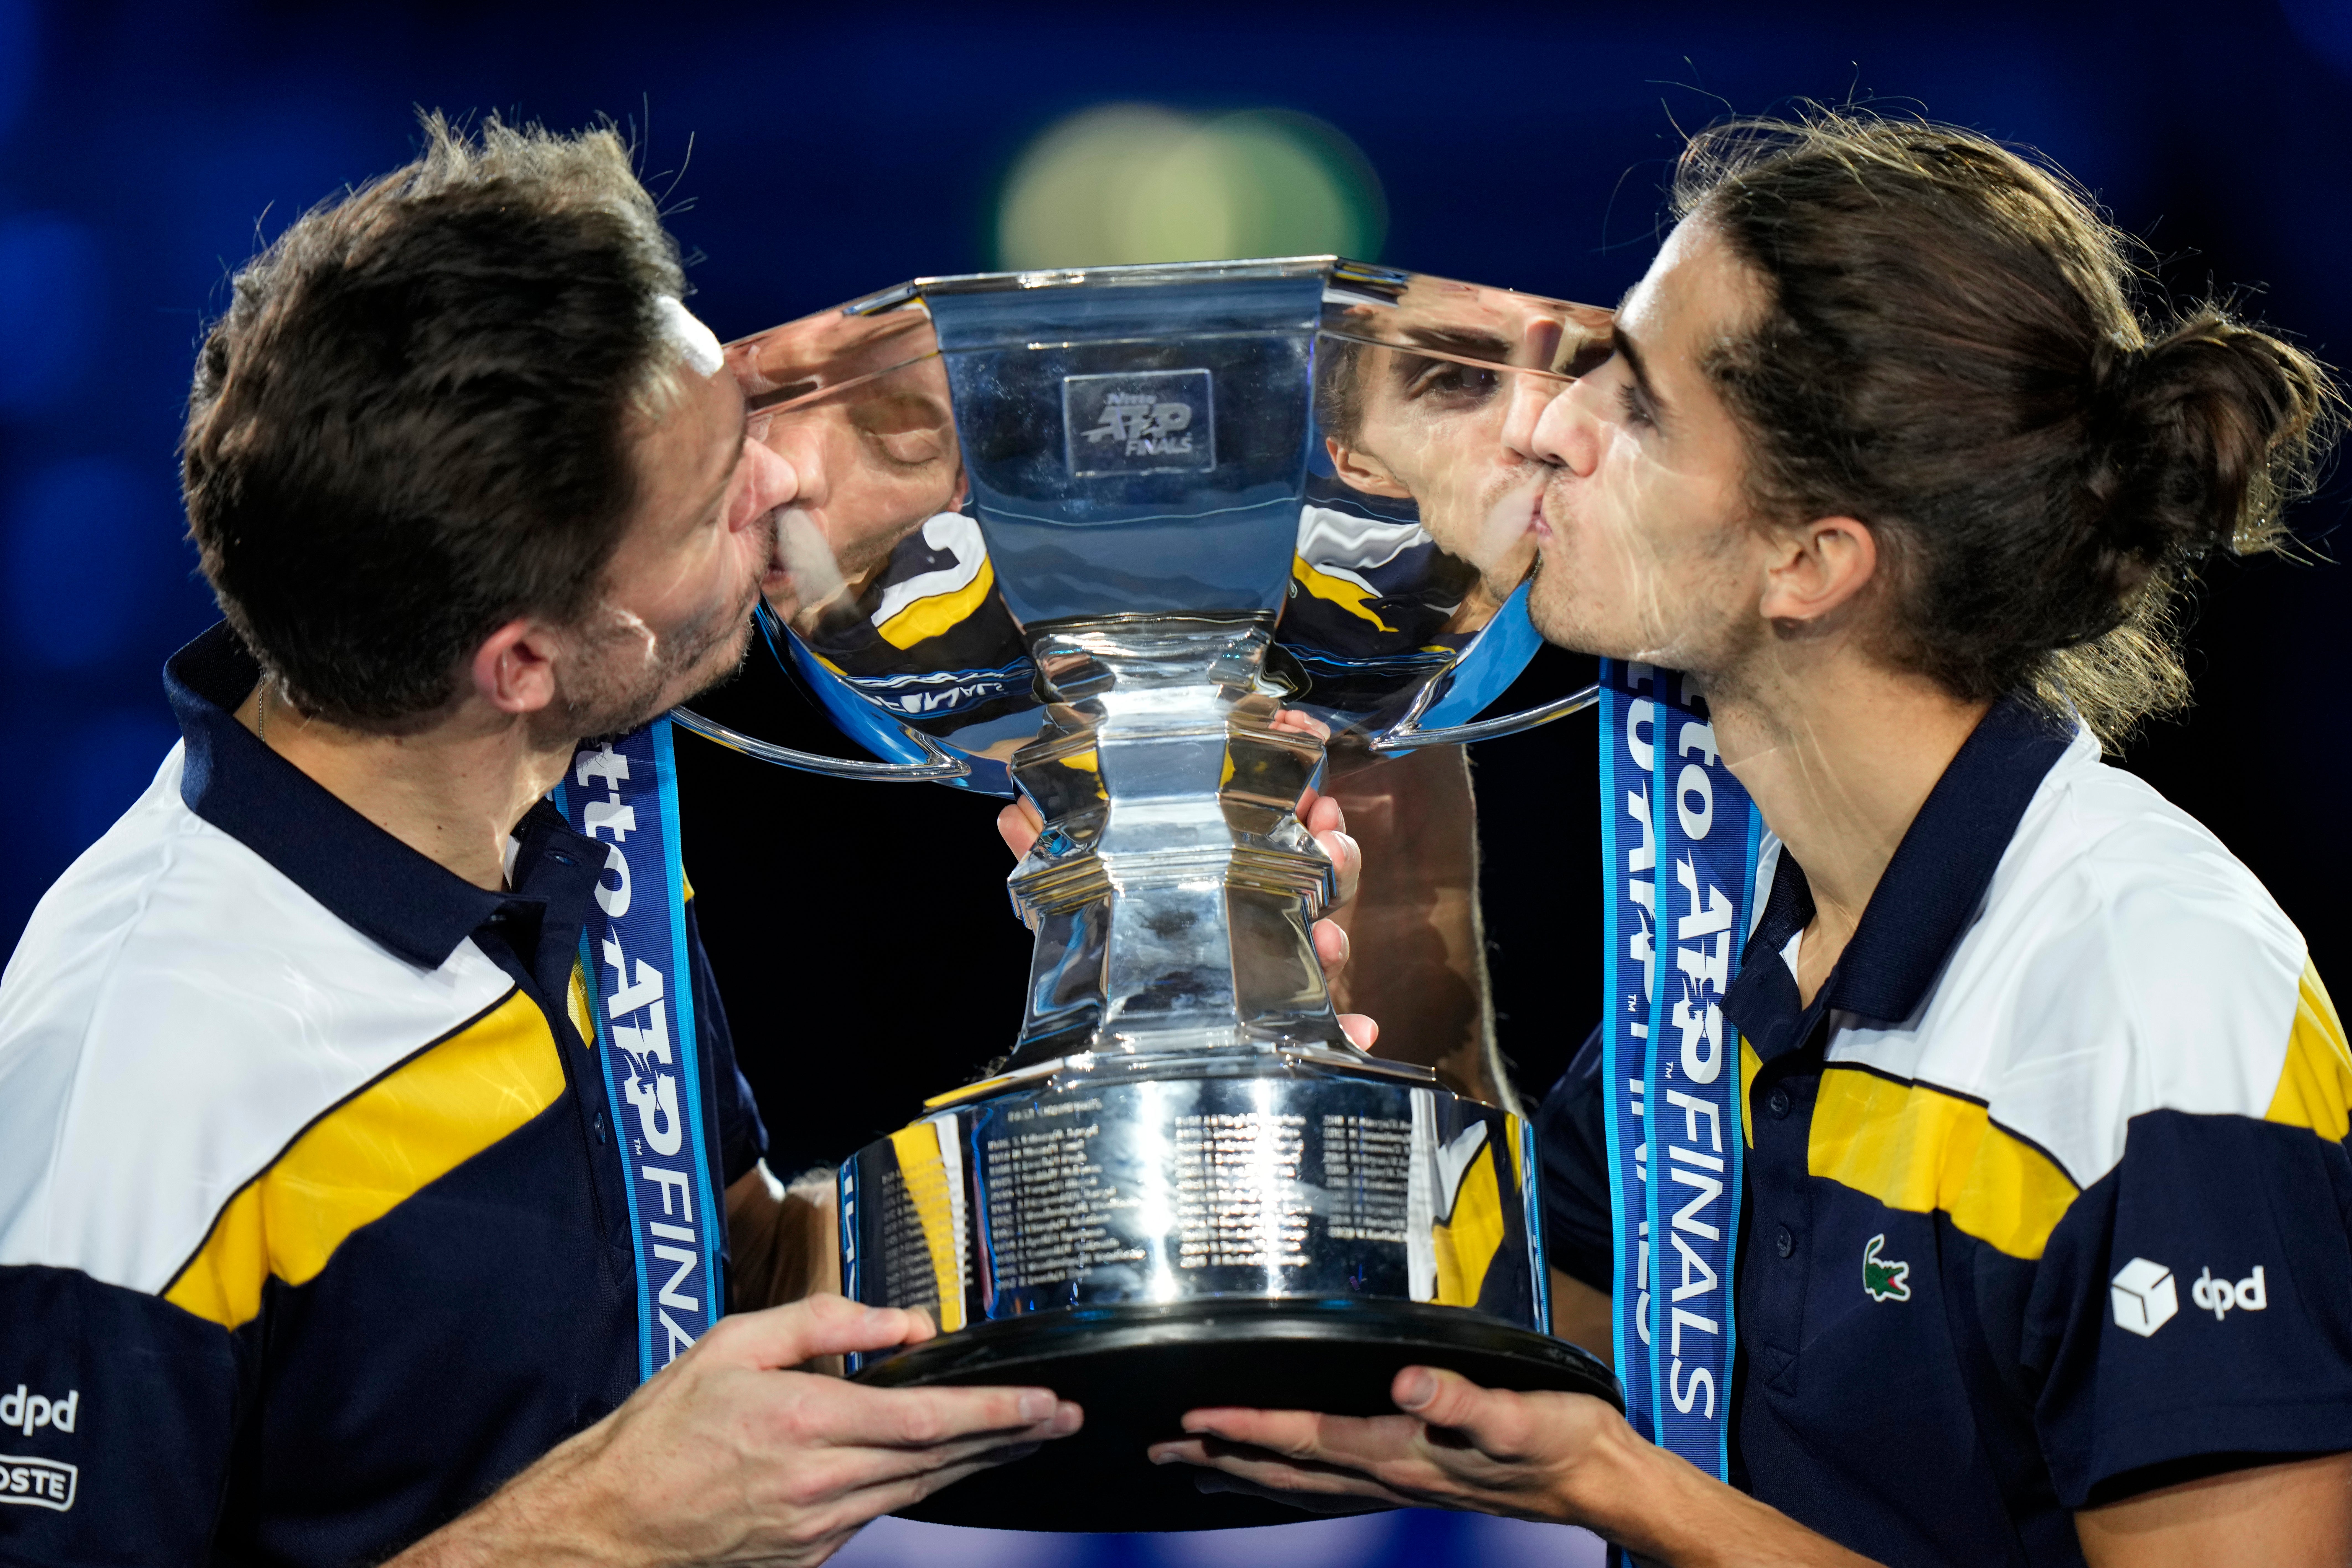 France’s Pierre-Hugues Herbert, right, and Nicolas Mahut kiss the trophy (Luca Bruno/AP)